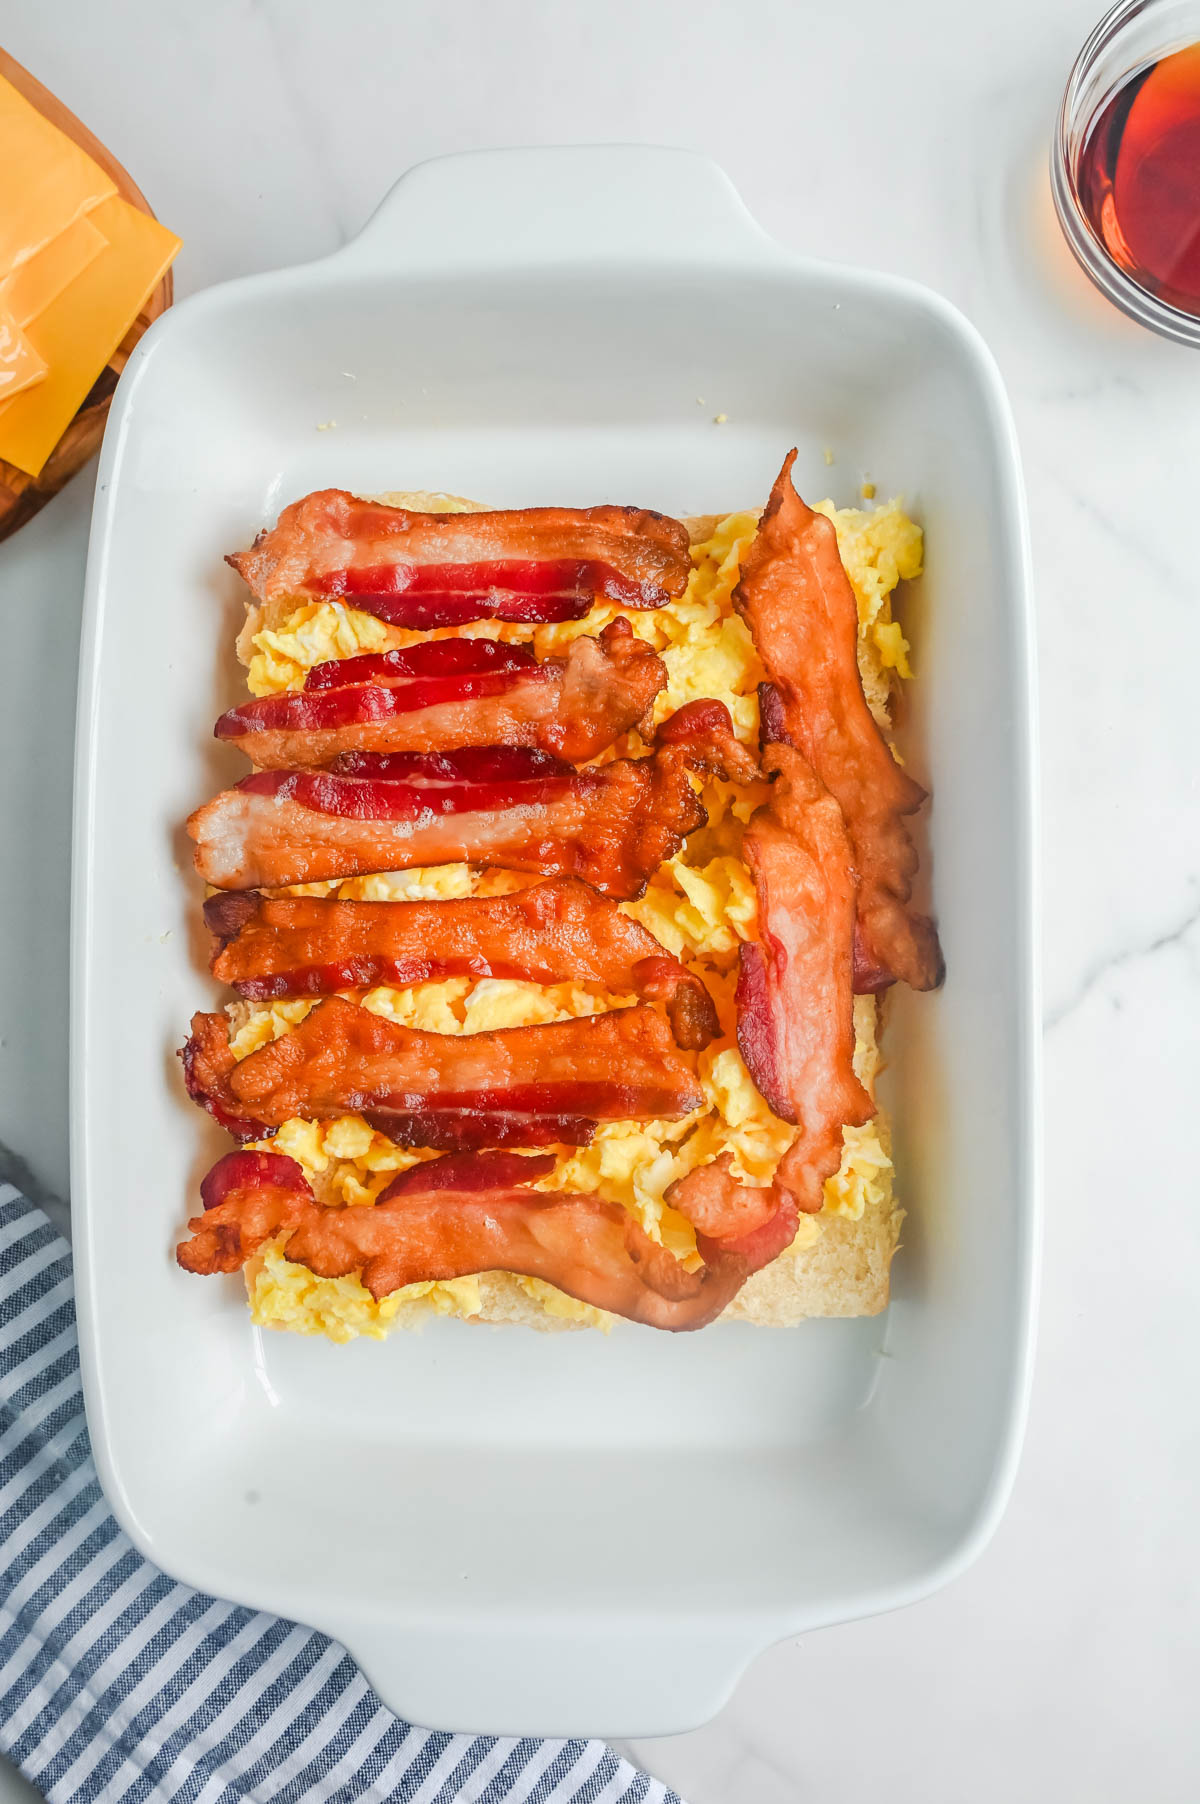 Bacon and eggs in a white baking dish.